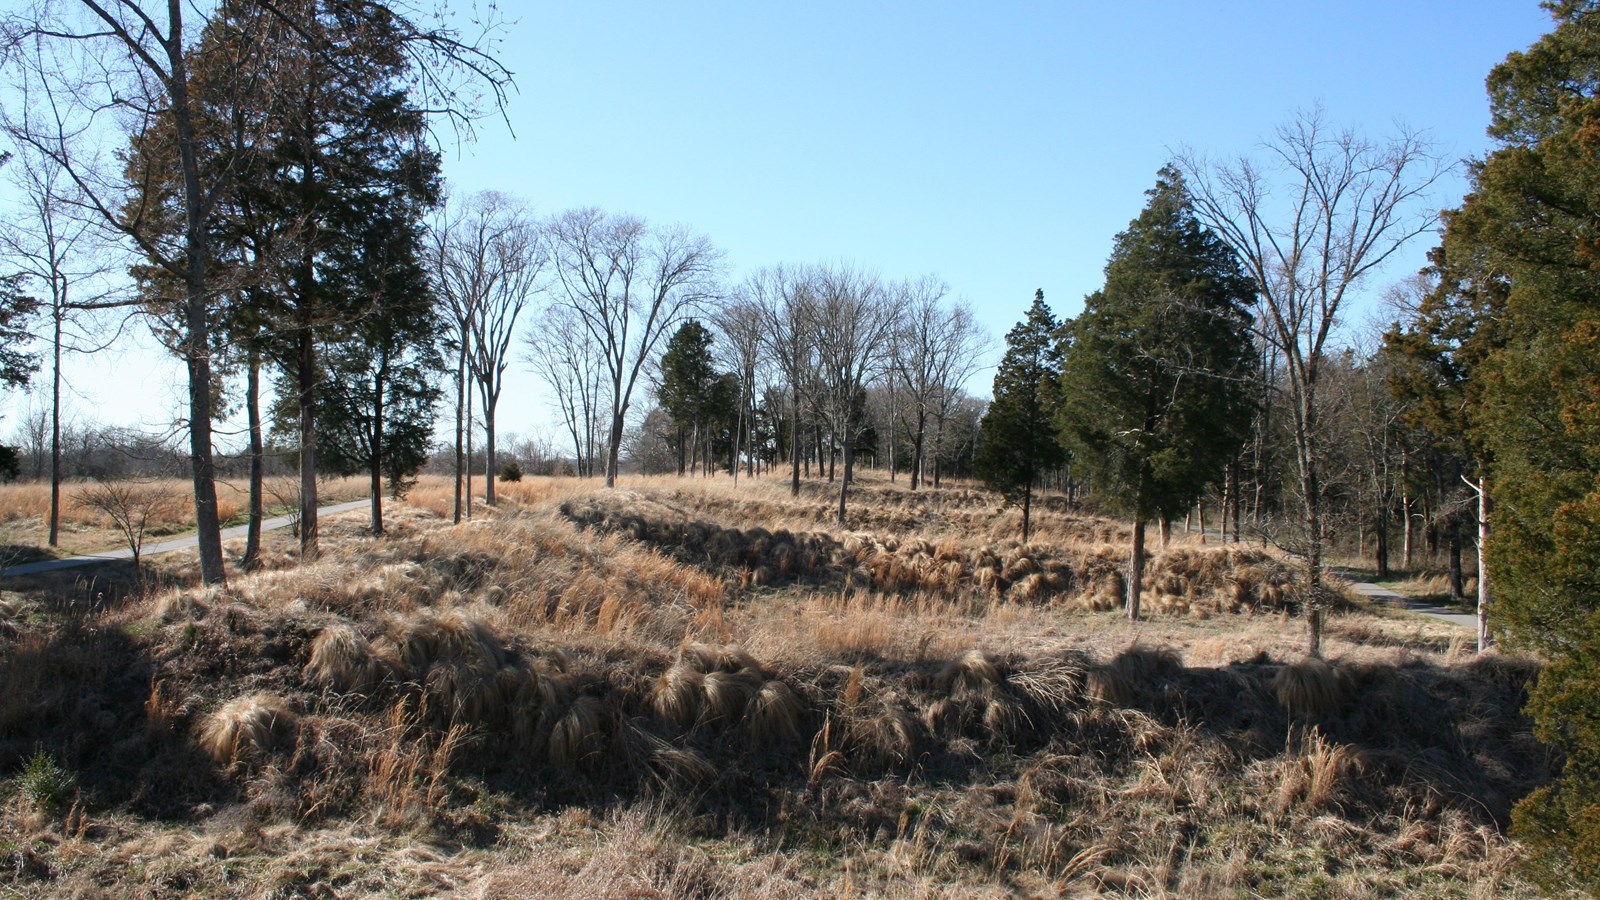 Large, rectangular earthworks covered by tall grass with trees growing along the ridges.